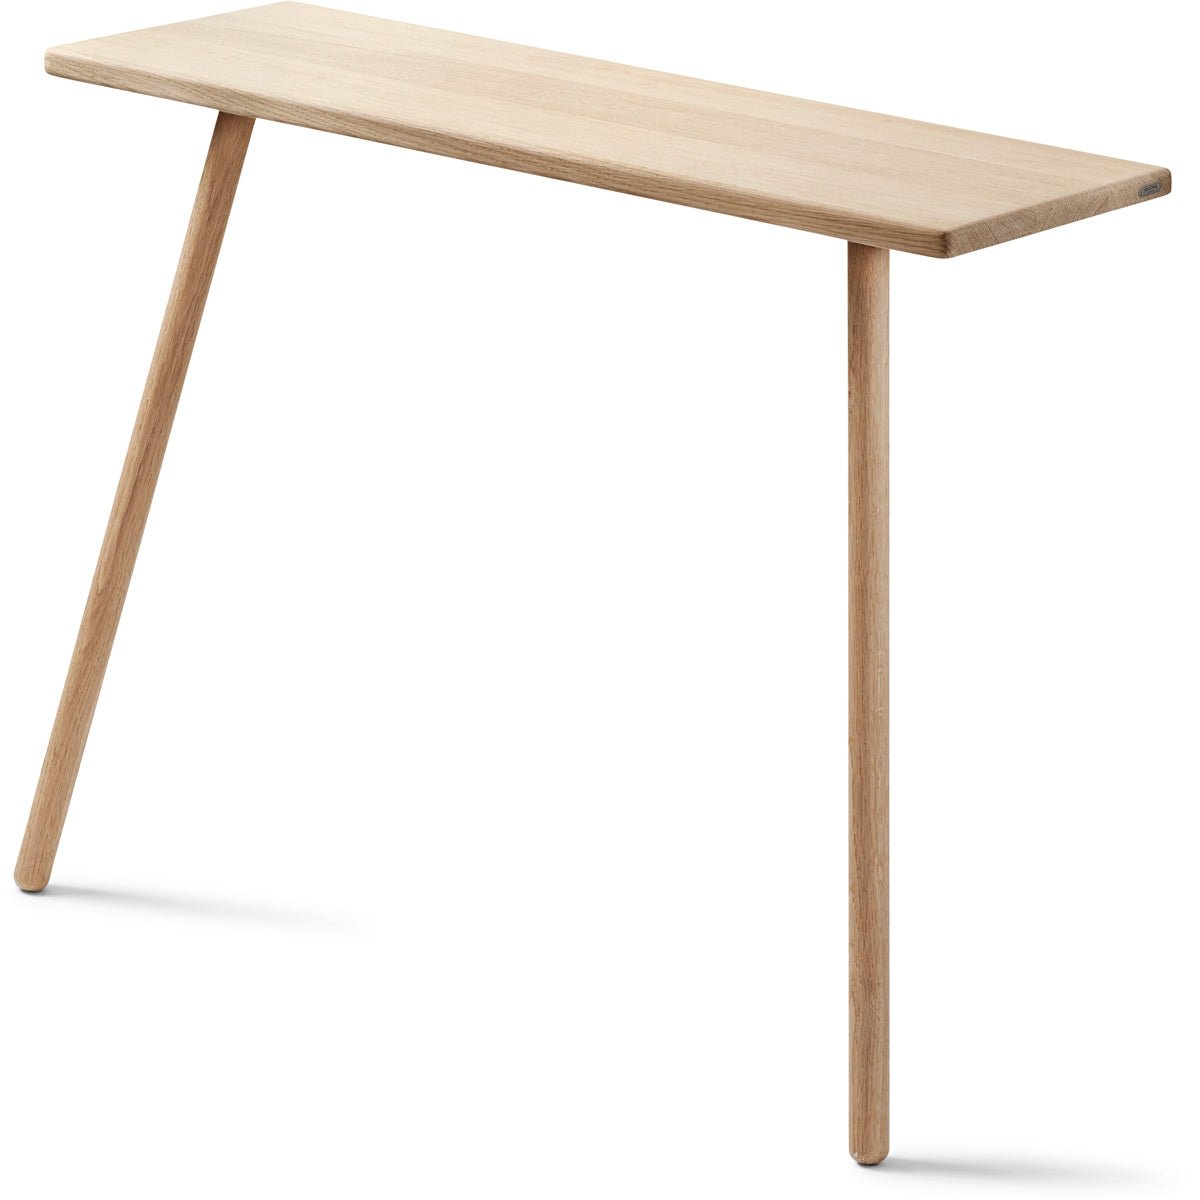 Georg Console Table - Oak Untreated